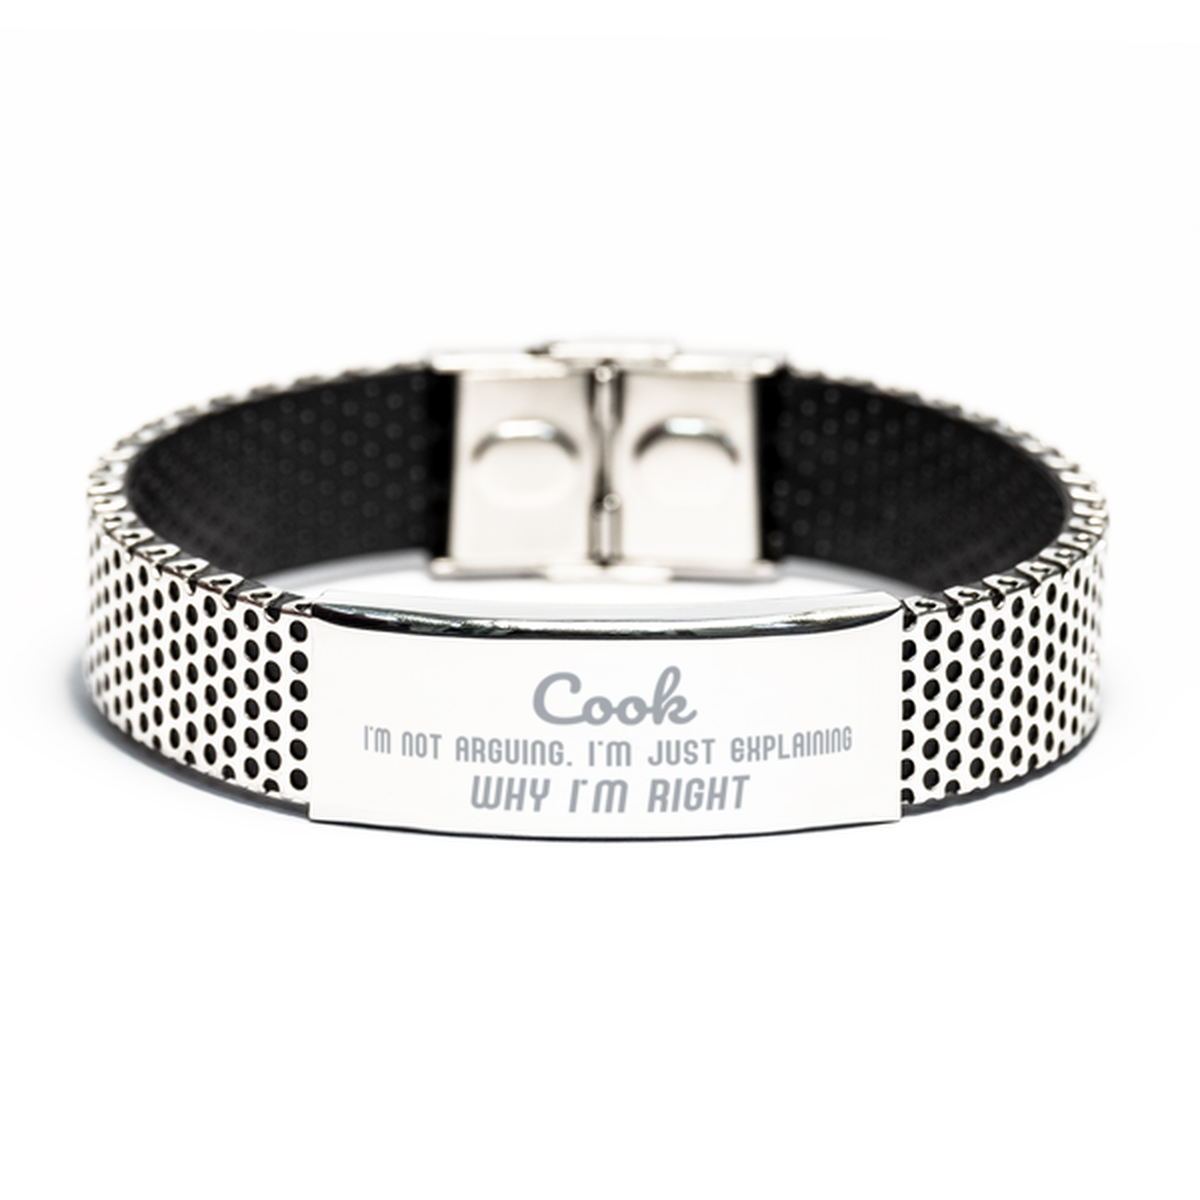 Cook I'm not Arguing. I'm Just Explaining Why I'm RIGHT Stainless Steel Bracelet, Funny Saying Quote Cook Gifts For Cook Graduation Birthday Christmas Gifts for Men Women Coworker